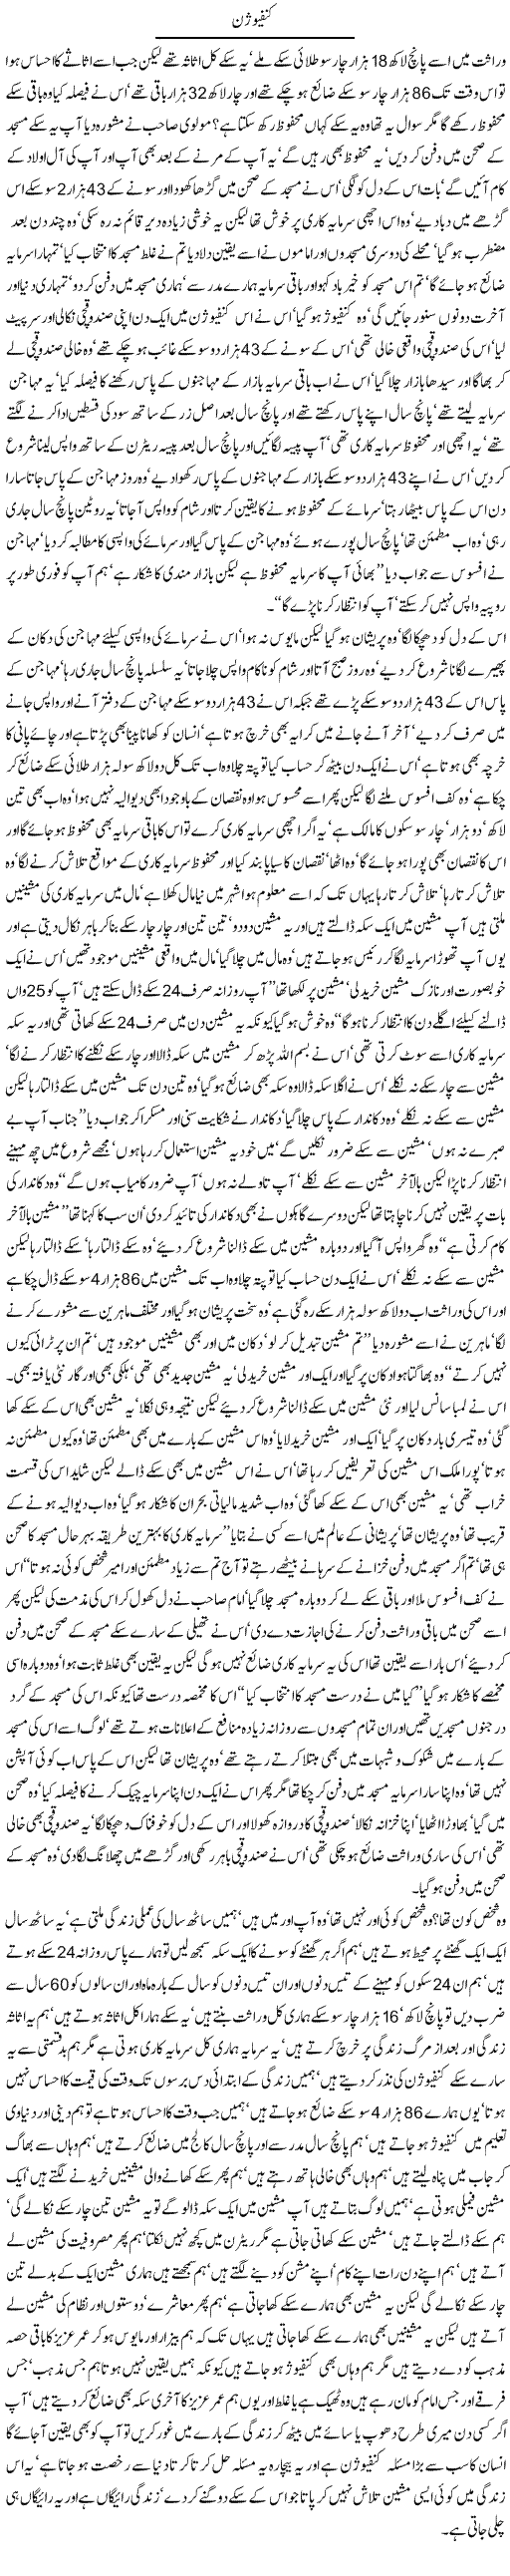 Confusion by Javed Chaudhry